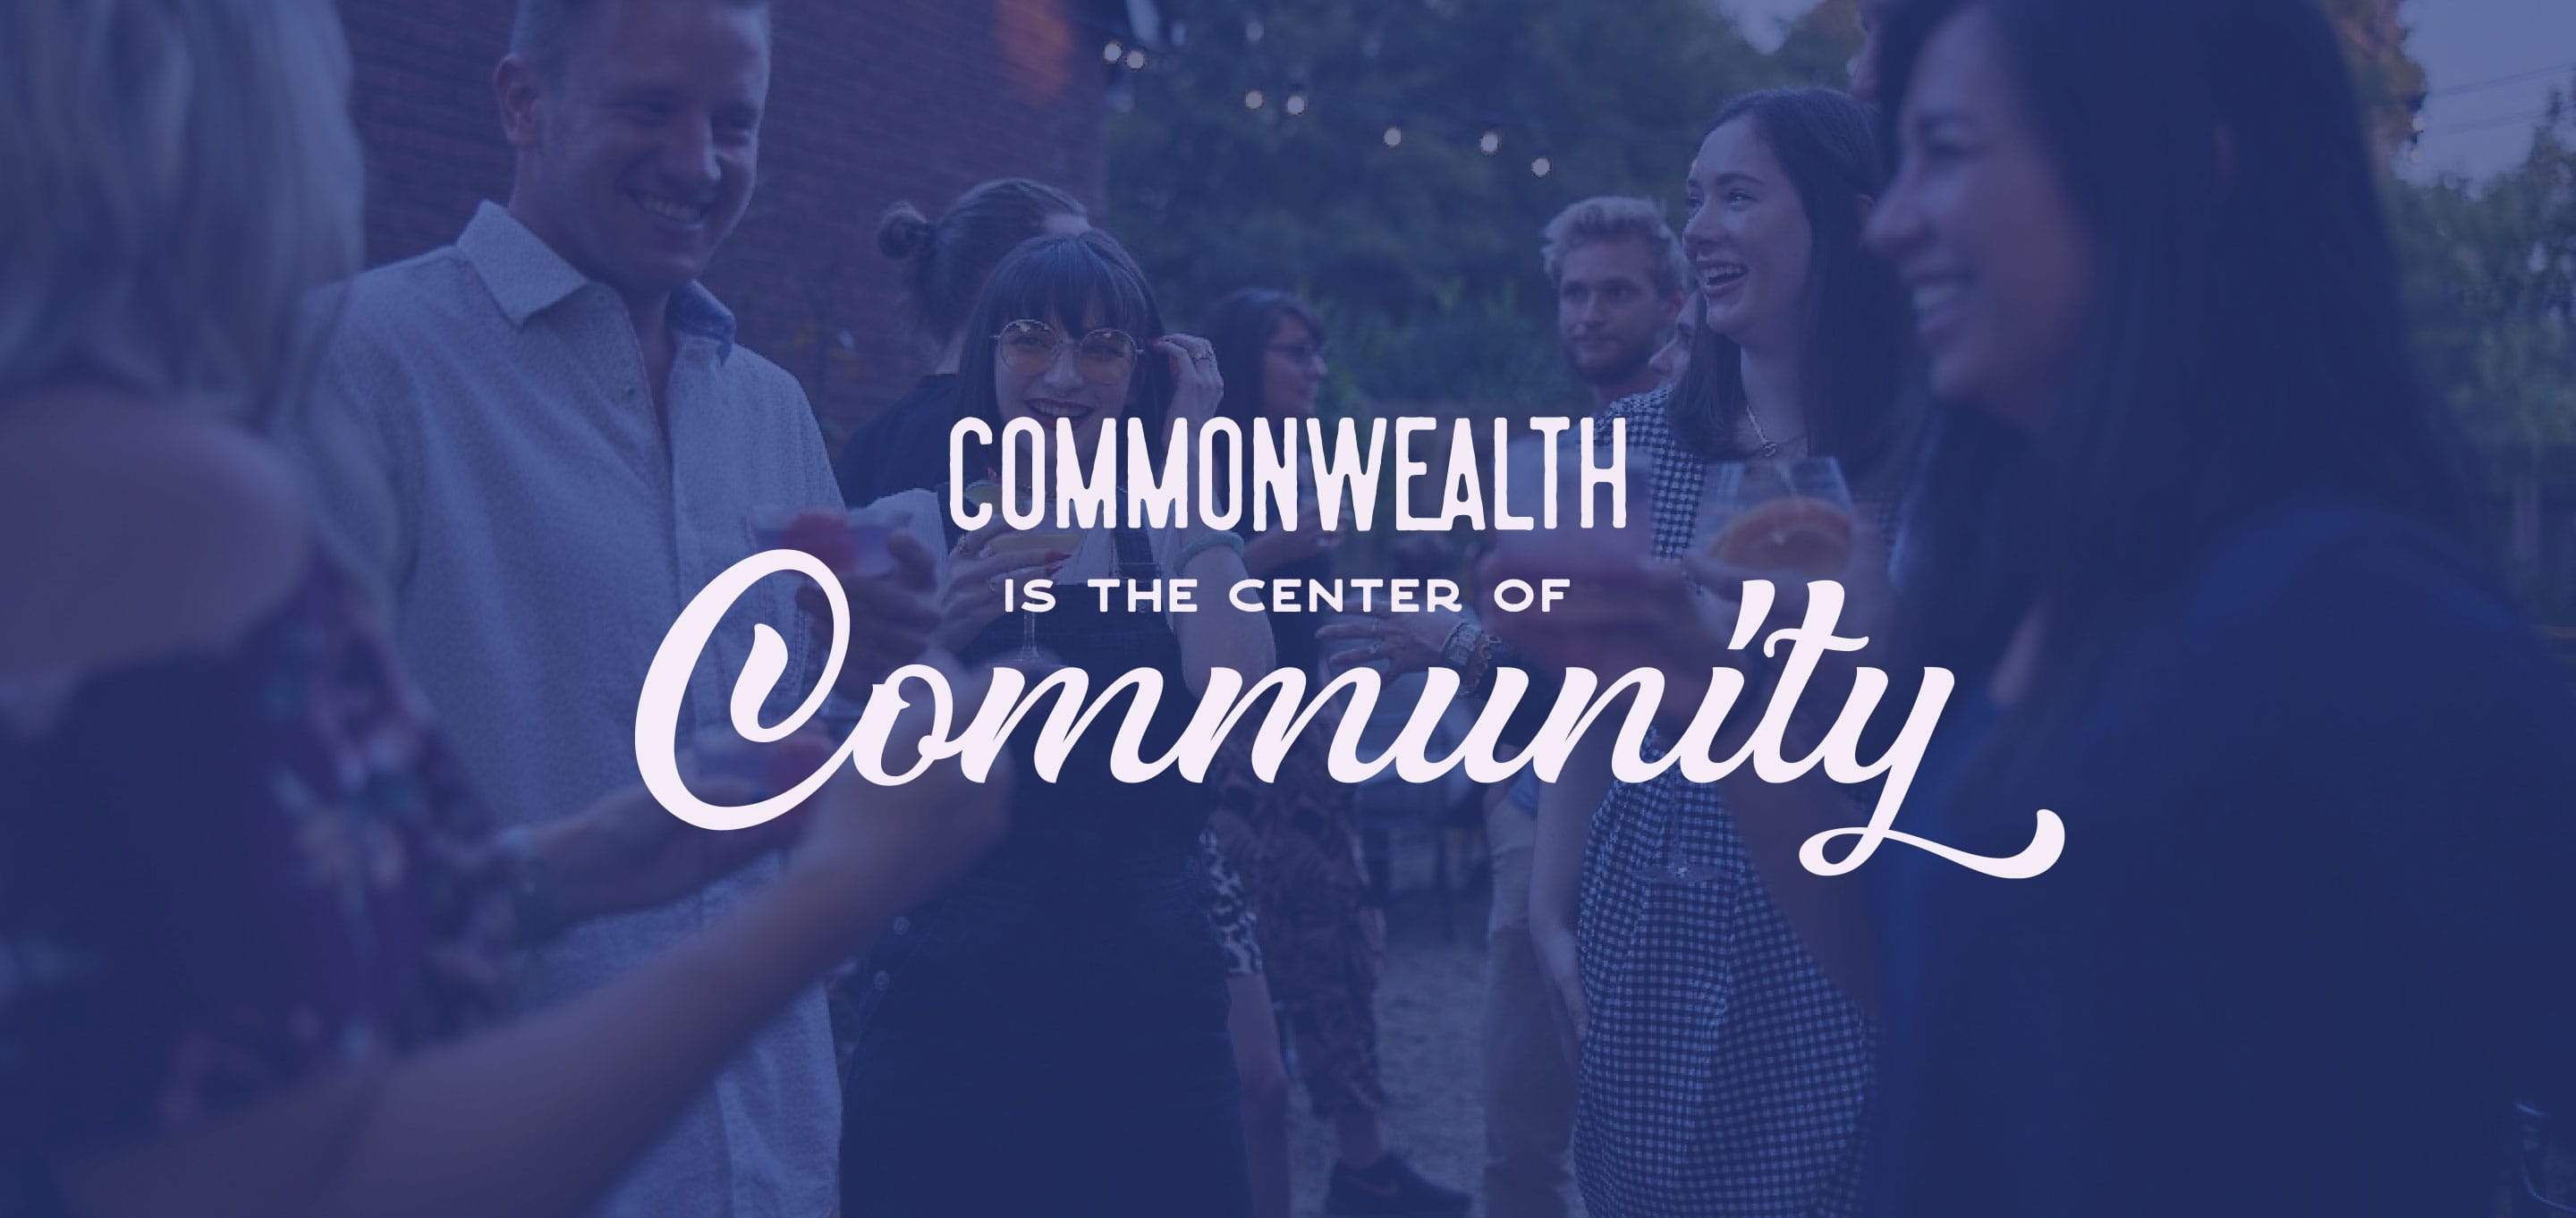 Promo for Commonwealth that says Commonwealth is the center of community